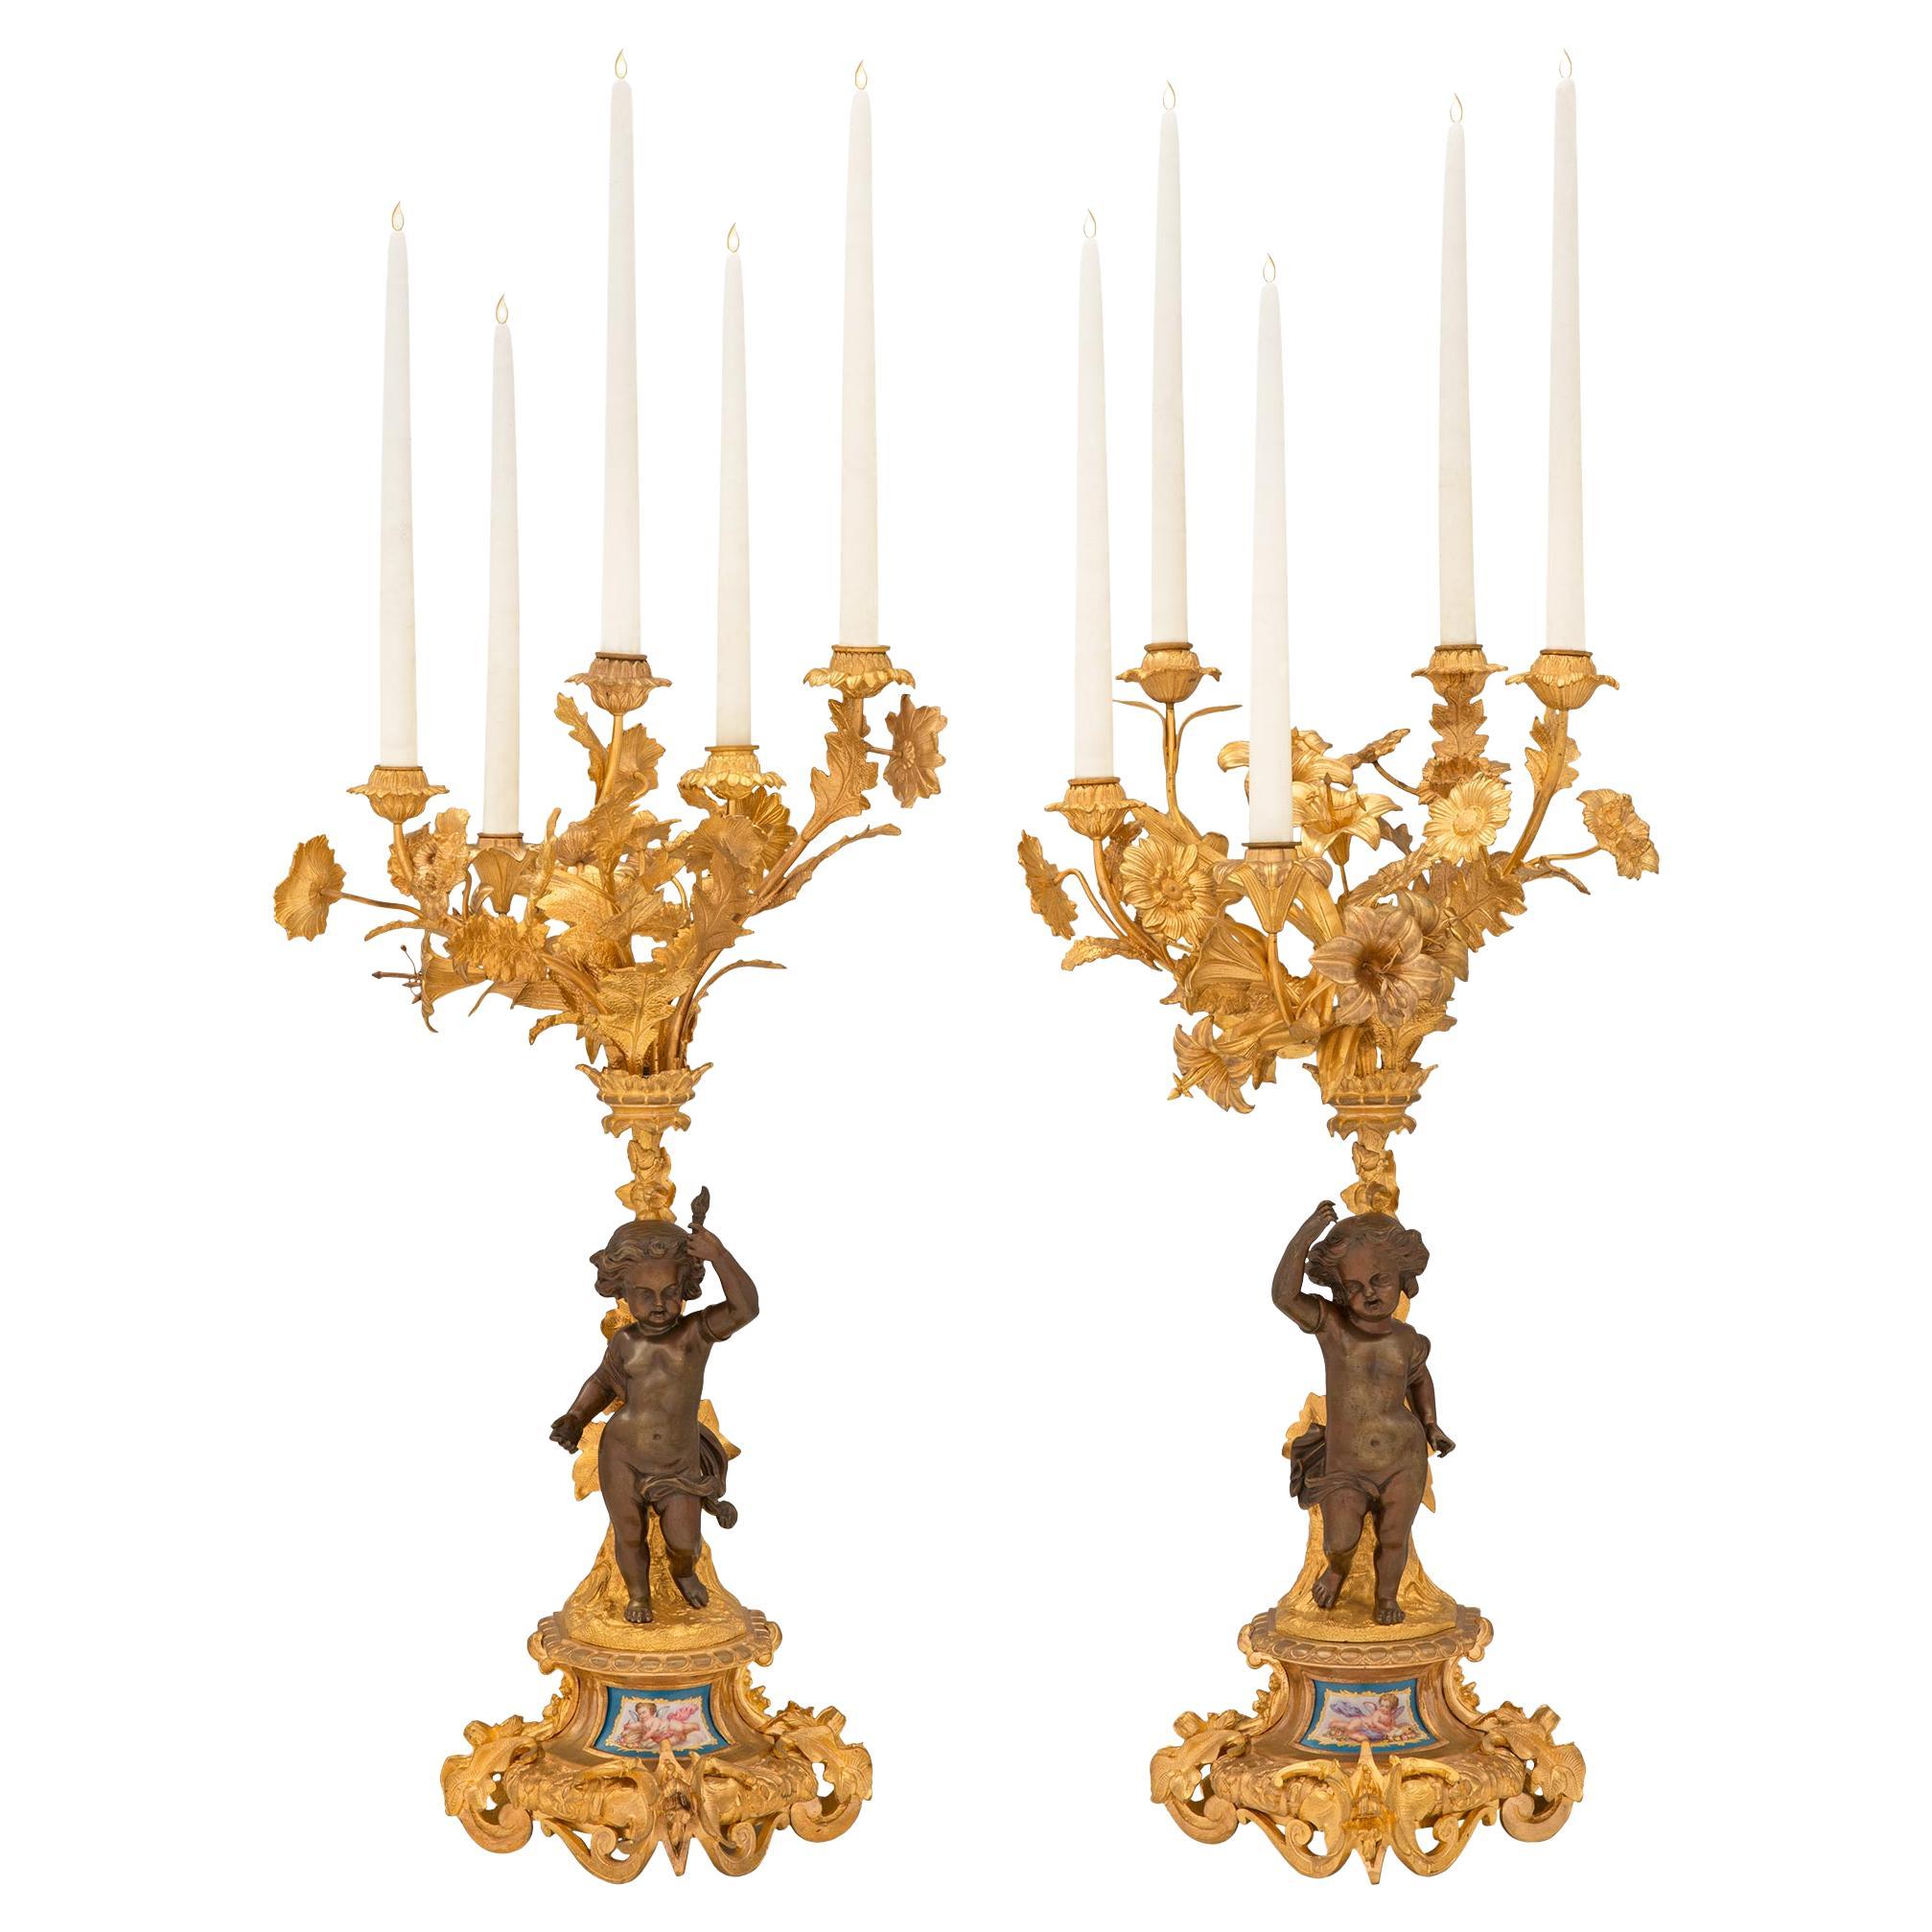 Pair of French 19th Century Ormolu and Patinated Bronze Candelabras